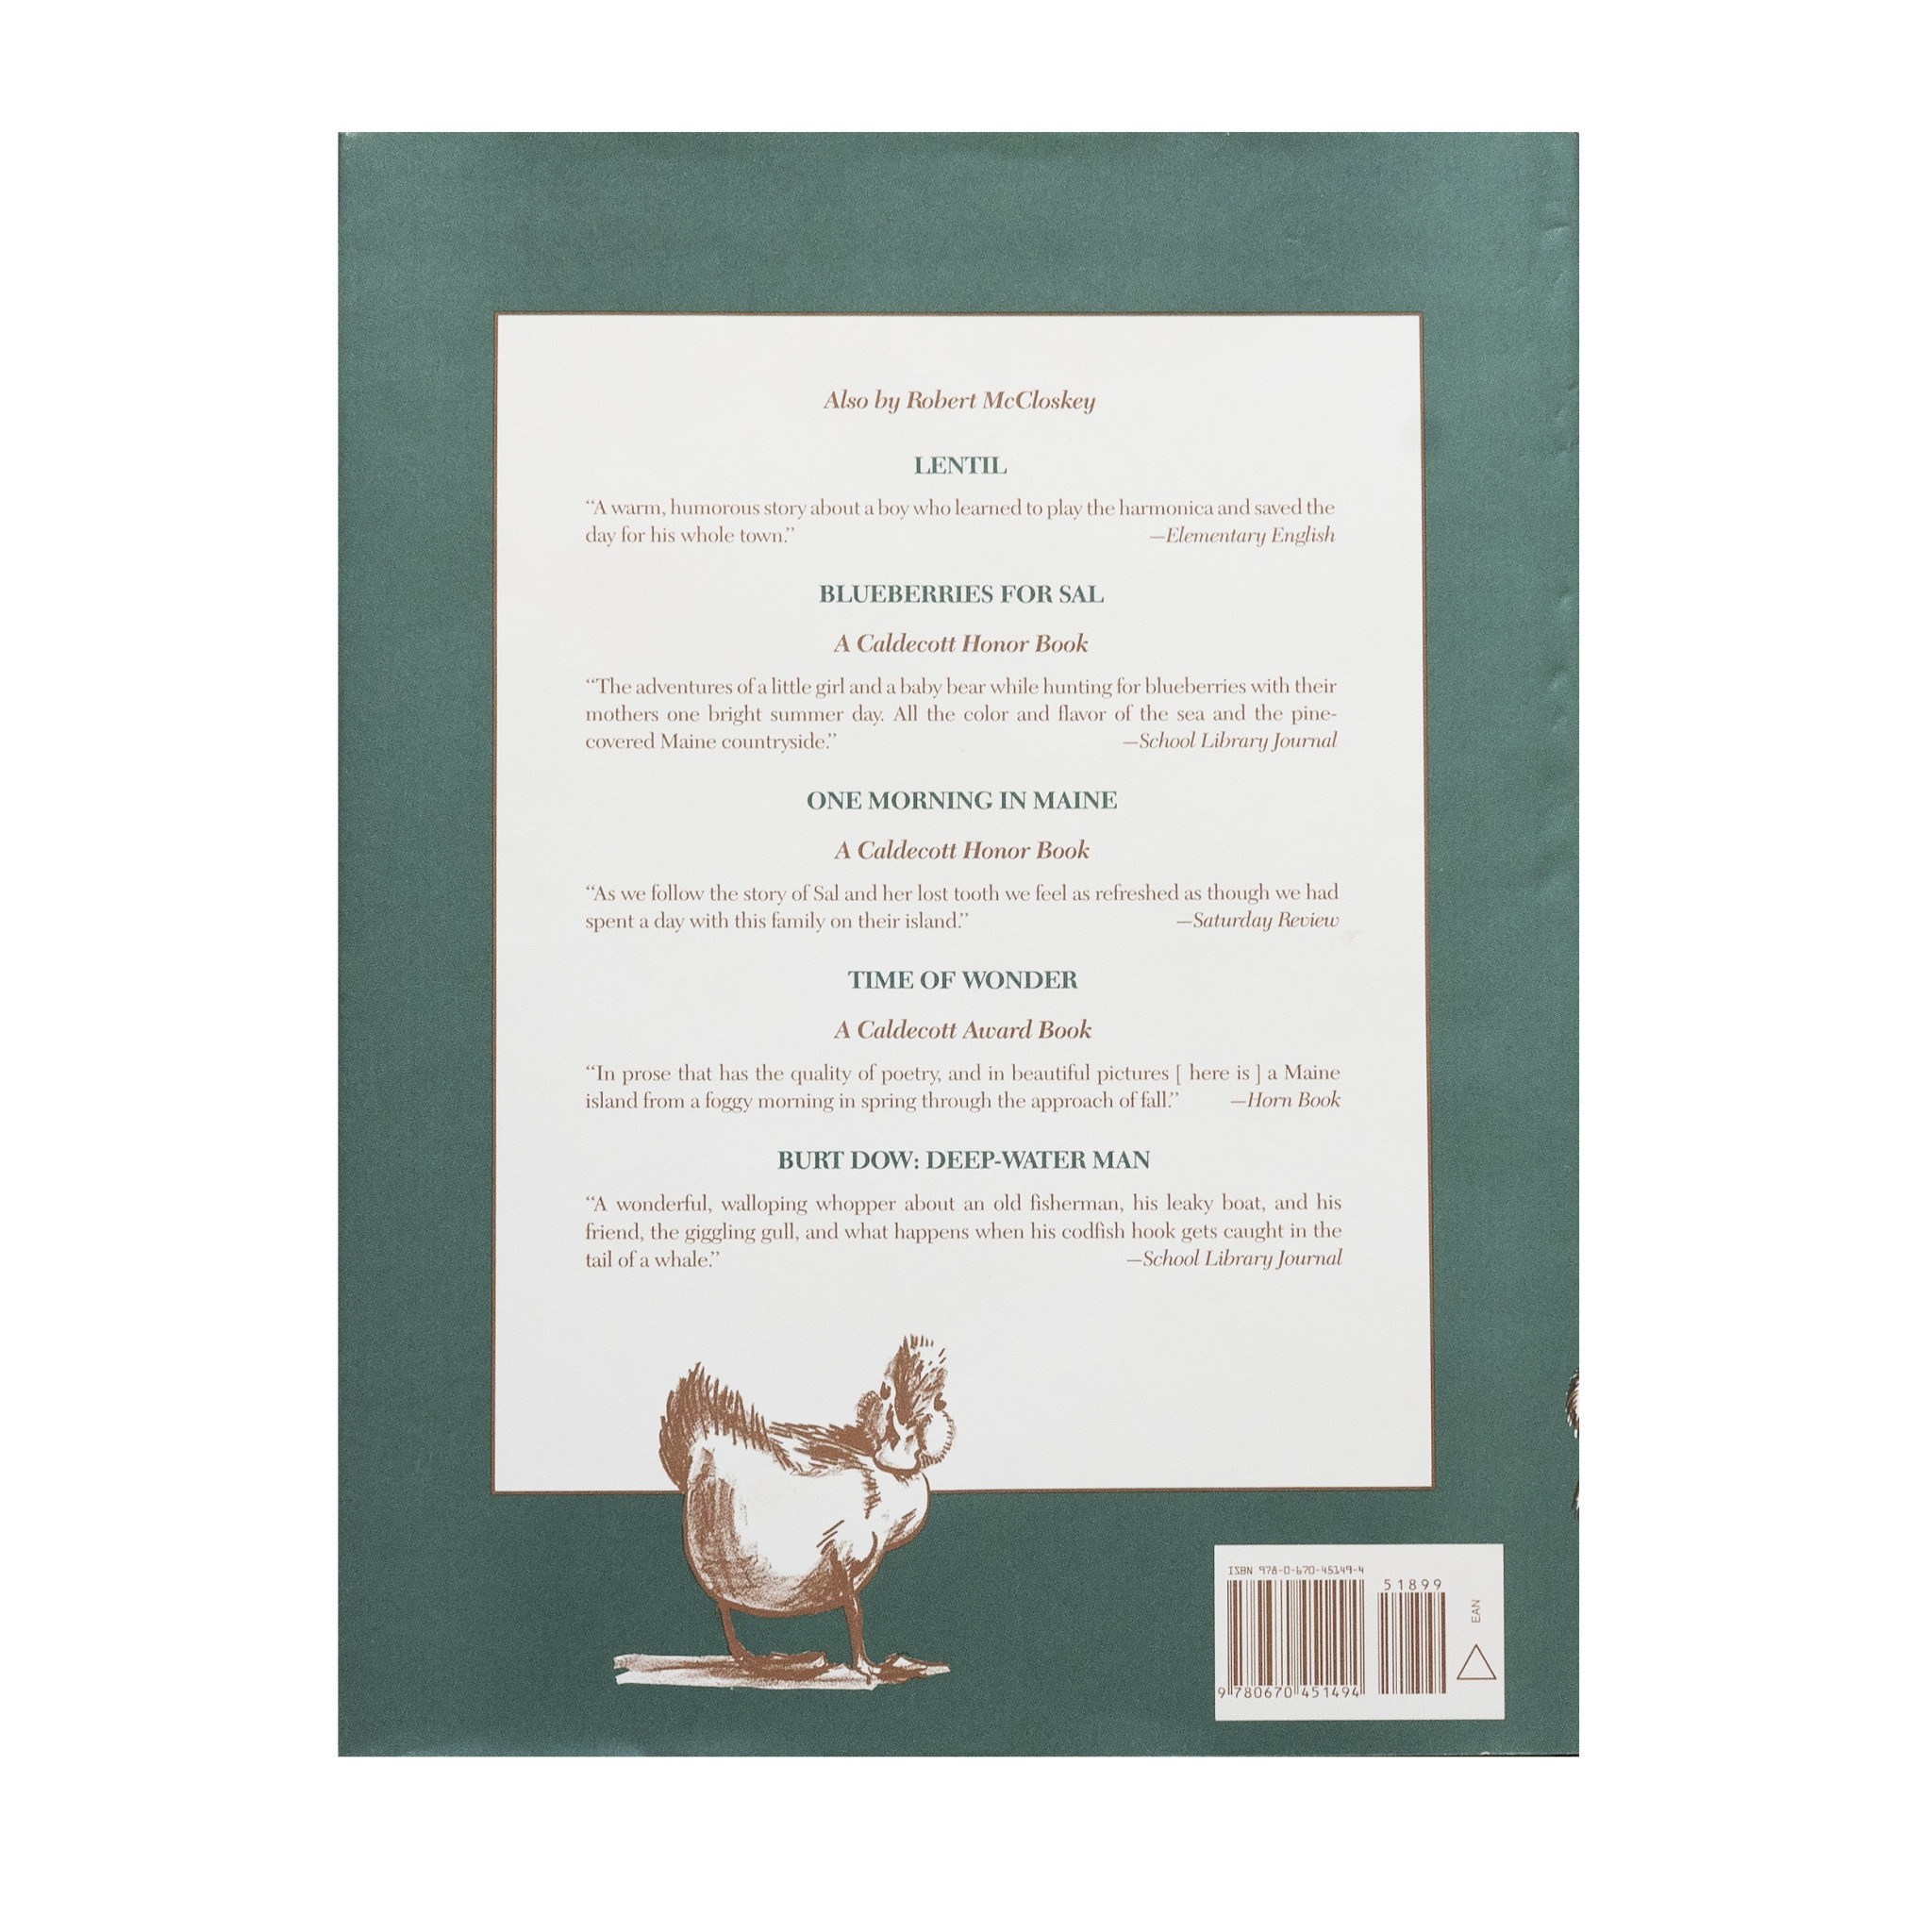 Make Way For Ducklings Hardcover